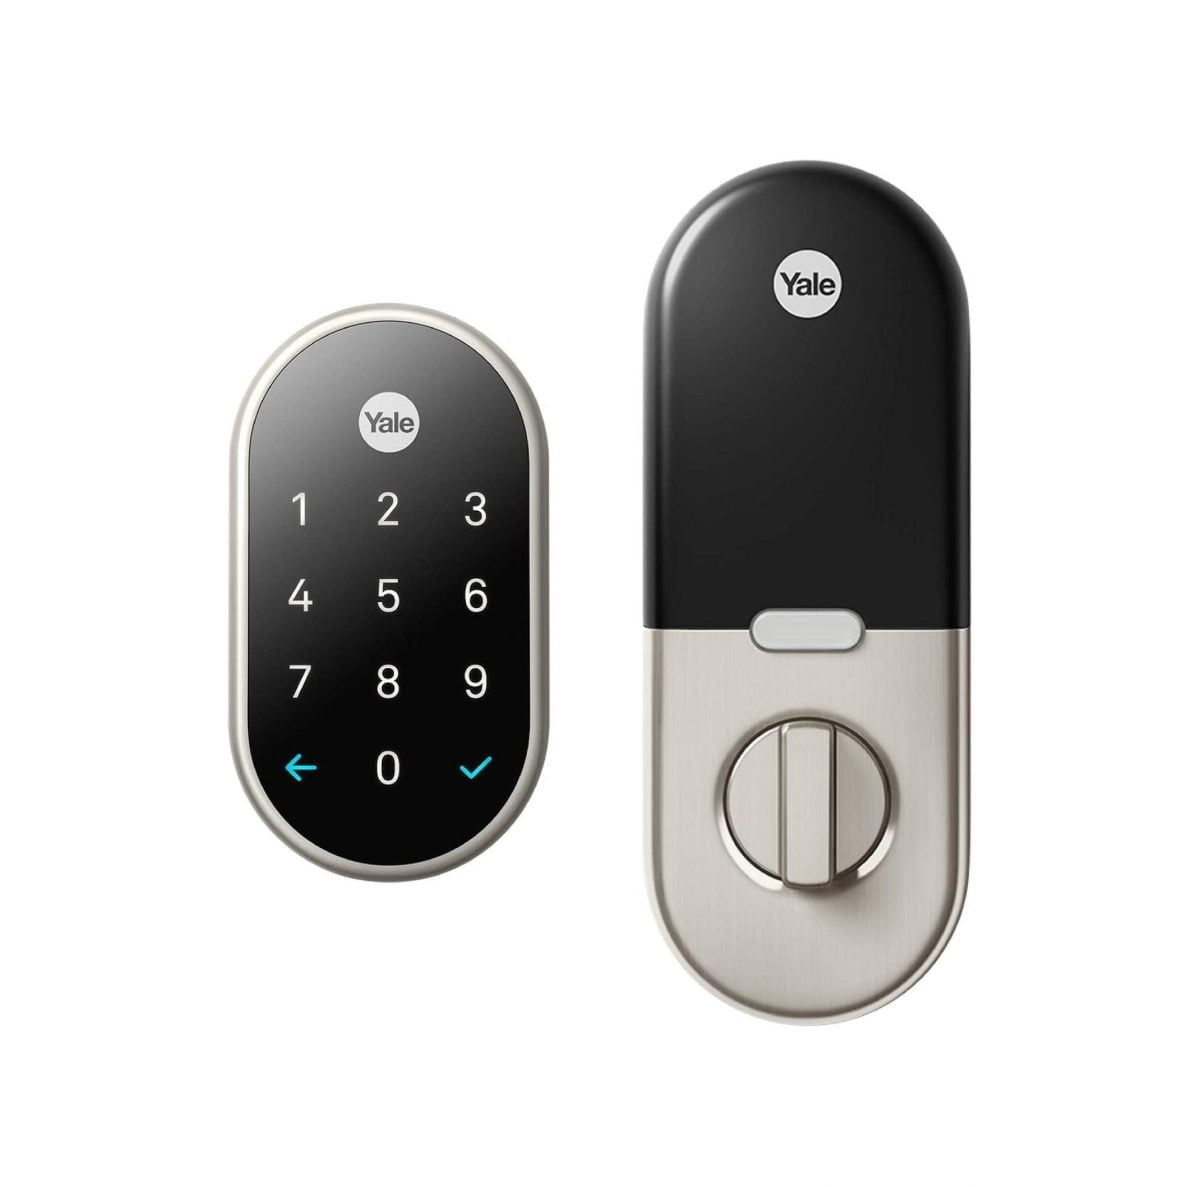 Nest Lock 05 Scaled Google &Lt;Ul Class=&Quot;A-Unordered-List A-Vertical A-Spacing-Mini&Quot;&Gt; &Lt;Li&Gt;&Lt;Span Class=&Quot;A-List-Item&Quot;&Gt;Secure And Tamper Proof: Replaces The Deadbolt You Already Have. If Someone Tries To Tamper With It, You'Ll Get An Alert. If The Batteries Start Running Low, You'Ll Know Right Away. And If Your Lock Loses Power, You Can Quickly Charge It With A 9V Battery To Unlock The Door.&Lt;/Span&Gt;&Lt;/Li&Gt; &Lt;Li&Gt;&Lt;Span Class=&Quot;A-List-Item&Quot;&Gt;Let Someone In From Anywhere: Unlock Your Door From Your Nest App. Create Passcodes For Family, Guests And People You Trust. Get Alerts Whenever Someone Unlocks And Locks The Door. And When Nest Knows You’re Away, Your Door Can Lock Automatically.&Lt;/Span&Gt;&Lt;/Li&Gt; &Lt;Li&Gt;&Lt;Span Class=&Quot;A-List-Item&Quot;&Gt;Works With Google Assistant: Check The Status Of Your Door And Lock It From Anywhere Hands‑Free With The Google Assistant. You Can Also Enter A Passcode, Use One‑Touch Locking, Or Lock It From The Nest App.&Lt;/Span&Gt;&Lt;/Li&Gt; &Lt;Li&Gt;&Lt;Span Class=&Quot;A-List-Item&Quot;&Gt;Touchscreen Keypad: No Phone? No Problem. Unlock Your Nest X Yale Lock By Entering Your Passcode On The Touchscreen Keypad. Create Passcodes For People You Trust.&Lt;/Span&Gt;&Lt;/Li&Gt; &Lt;/Ul&Gt; Https://Youtu.be/Dbdxol3Avxe Google Rb-Yrd540-Wv-619 X Yale Lock With Nest Connect Google Rb-Yrd540-Wv-619 X Yale Lock With Nest Connect, Satin Nickel